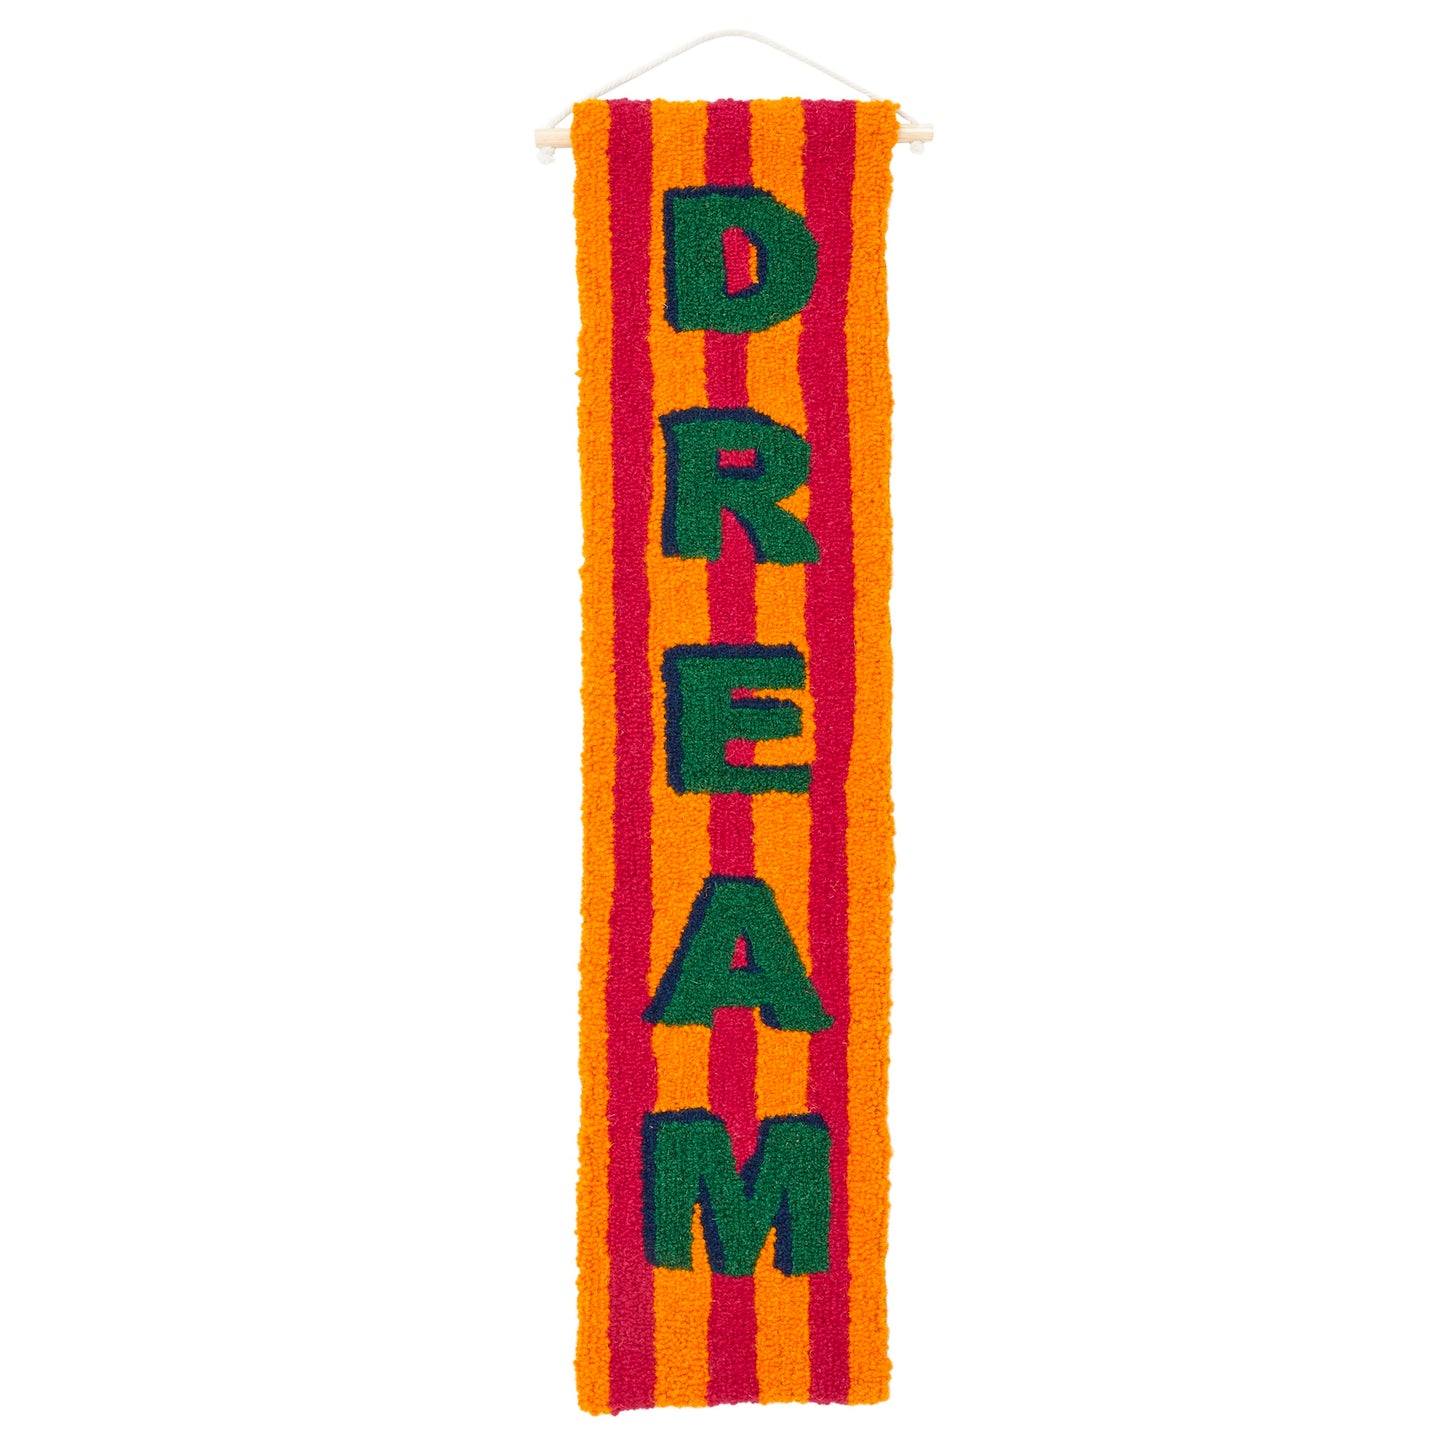 DREAM in a bold shadow text, Green and Navy shadows with a Magenta and Orange striped background in a loop pile using reclaimed yarn. 